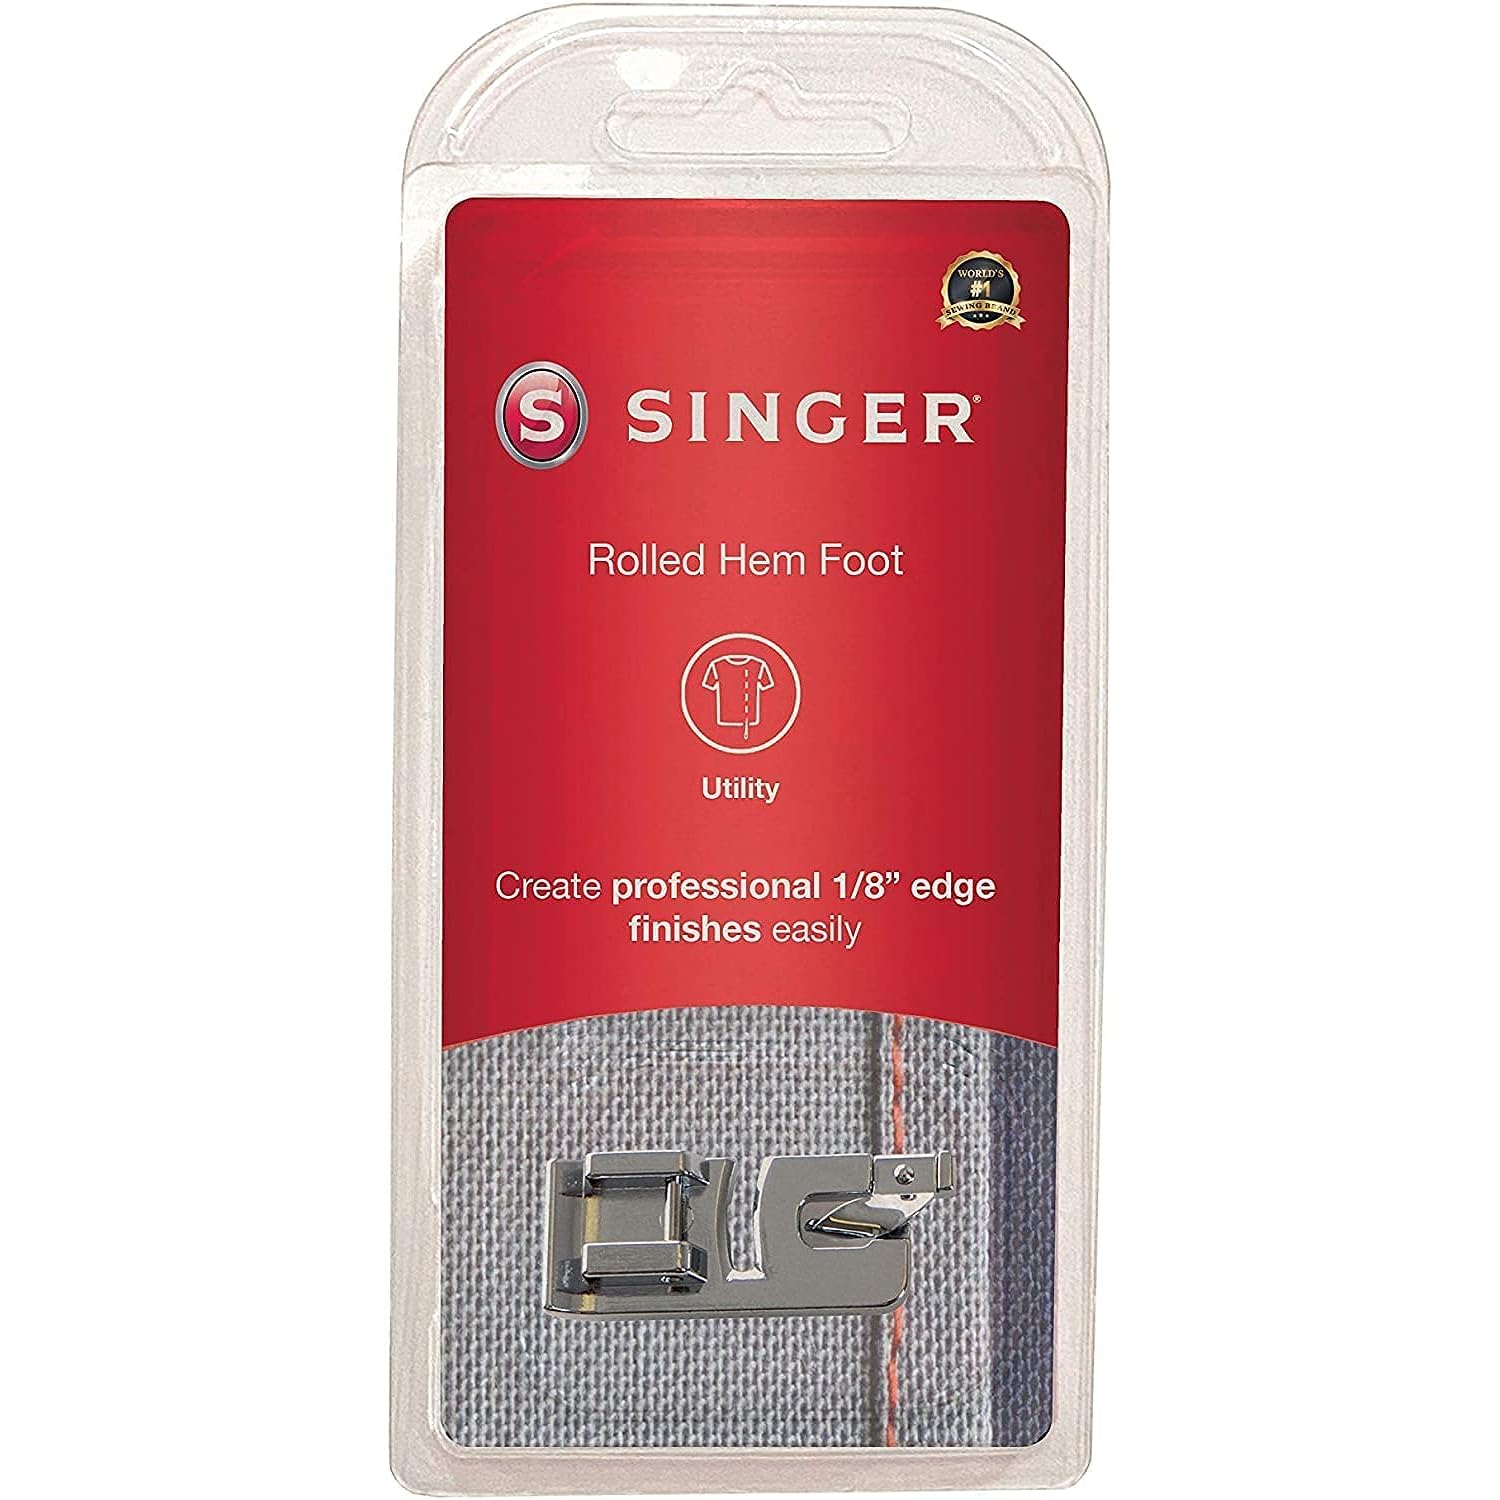 SINGER | Narrow Rolled Hem Foot for Low-Shank Sewing Machines, 1/8 Inch Hem, Light to Medium Weight Fabrics, Couch Over Na…